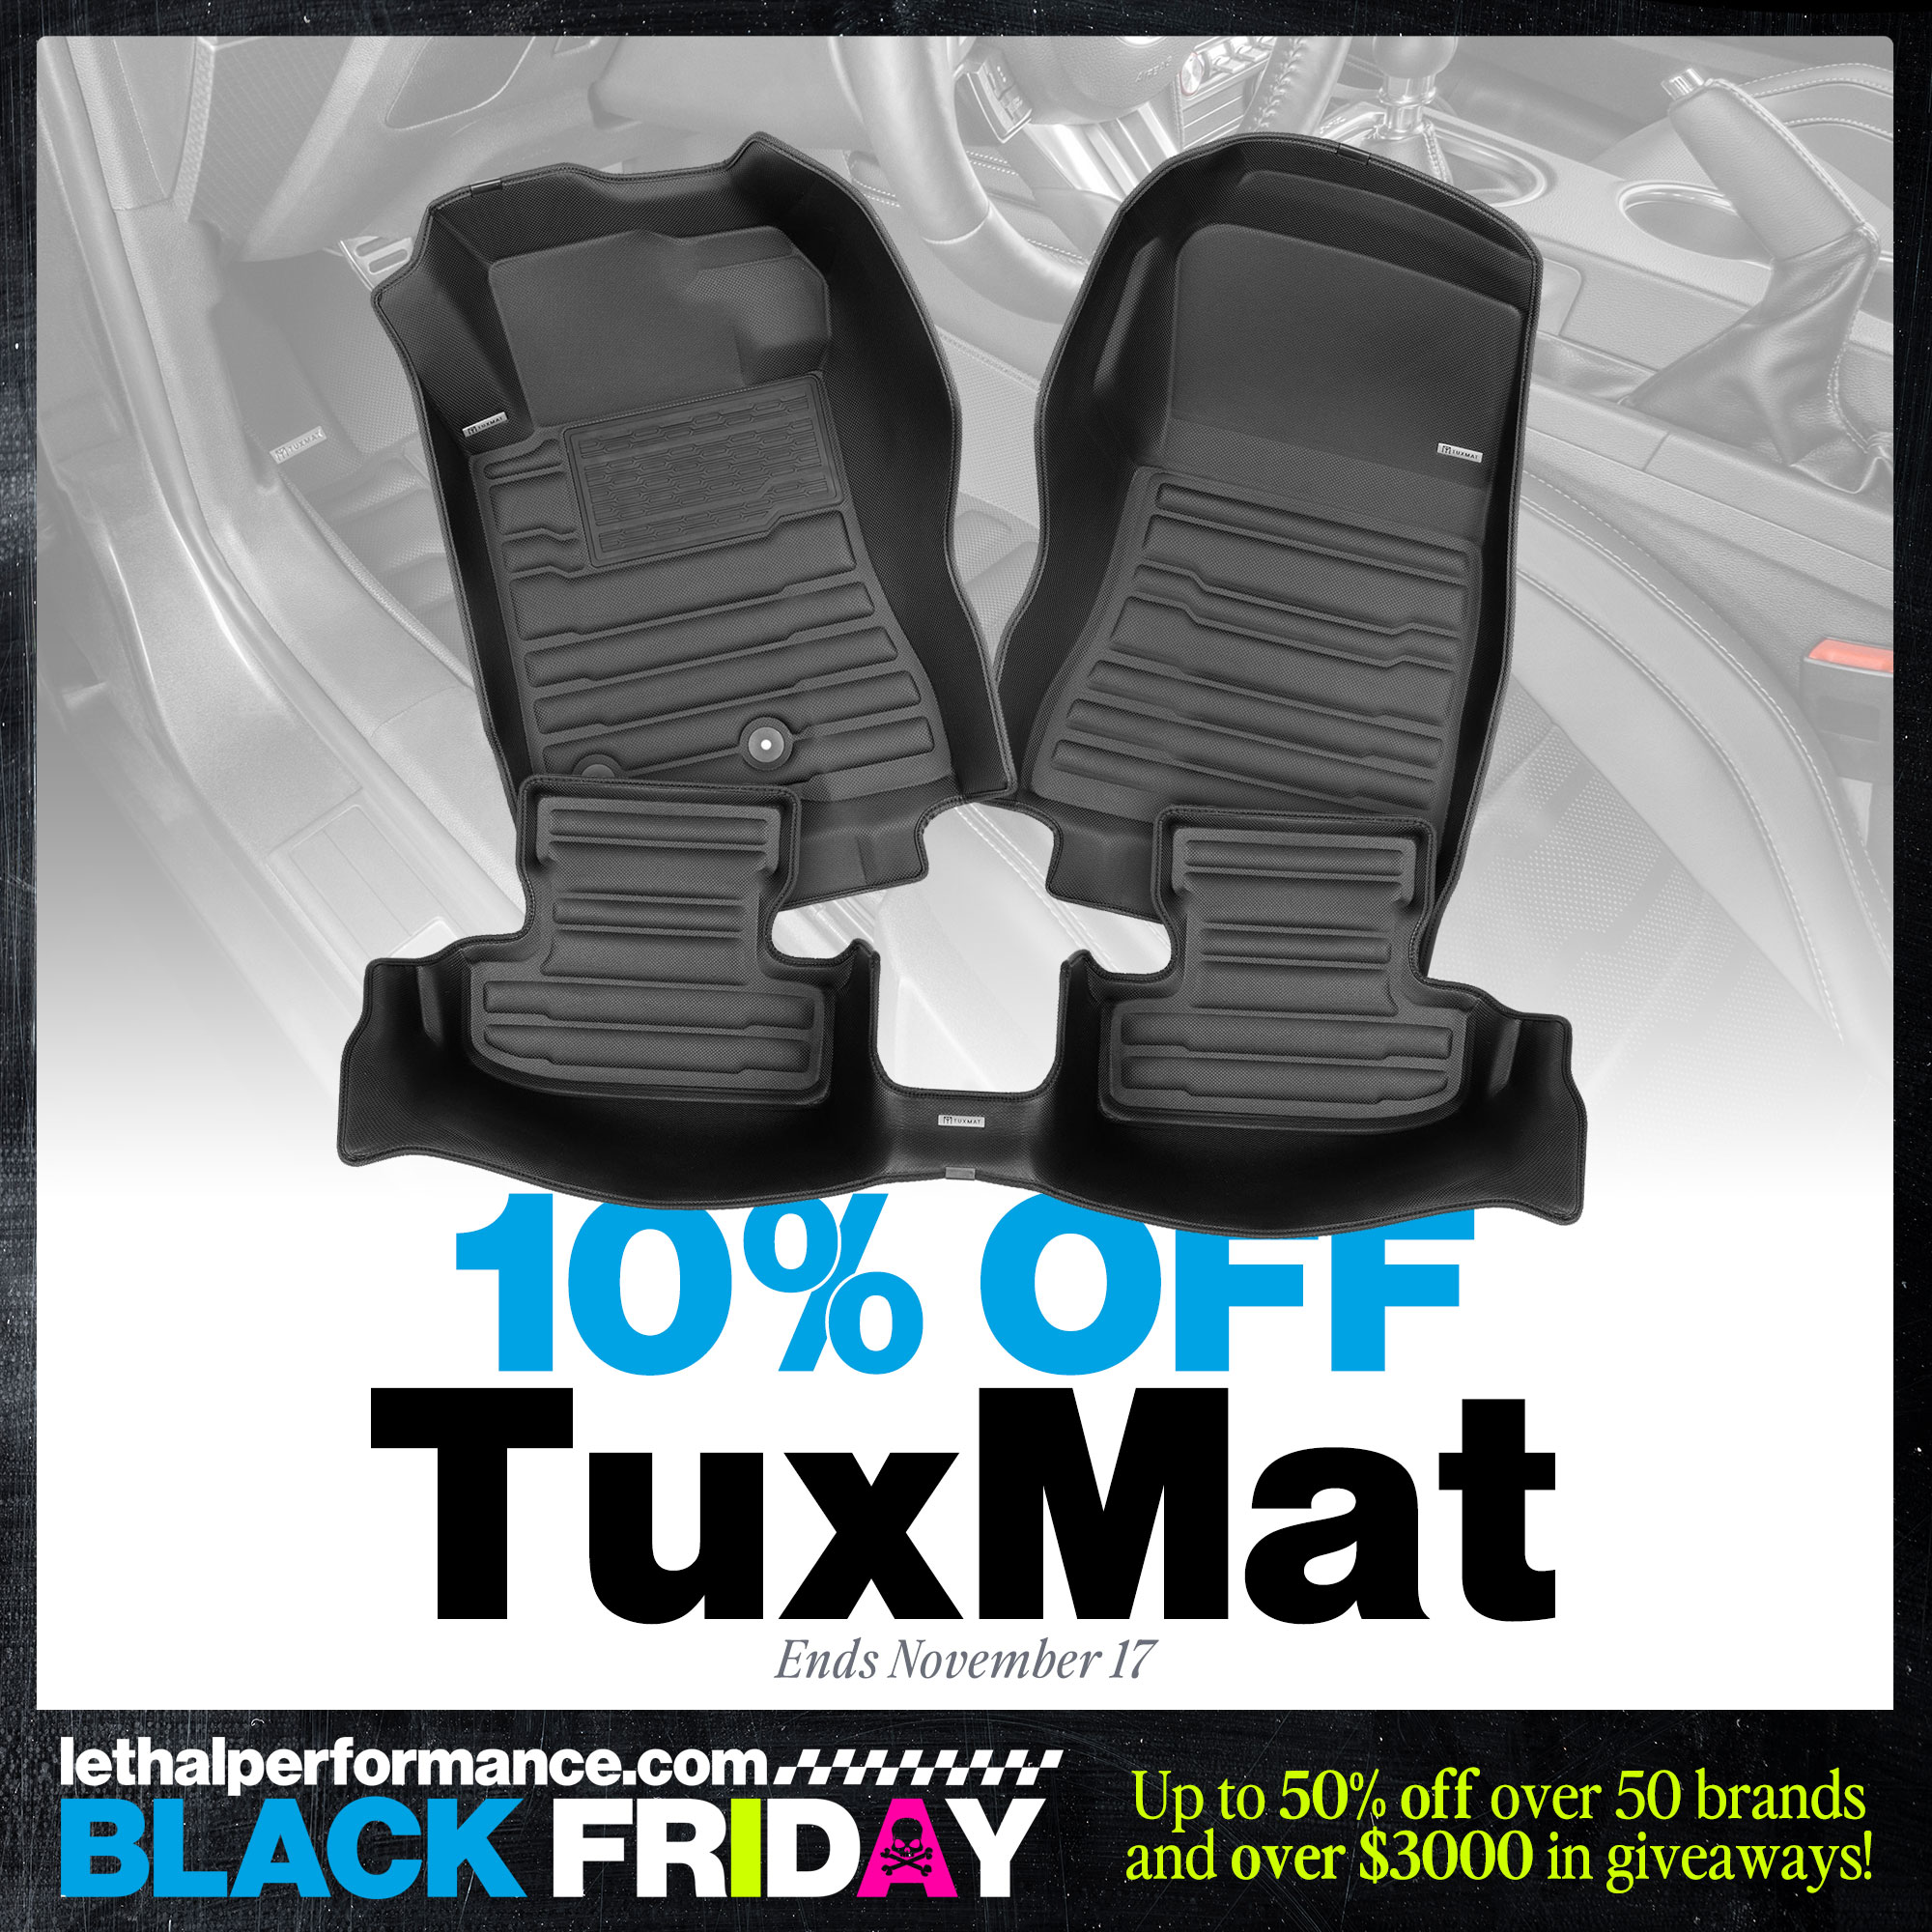 S650 Mustang Black Friday starts NOW! Up to 50% off! TuxMat